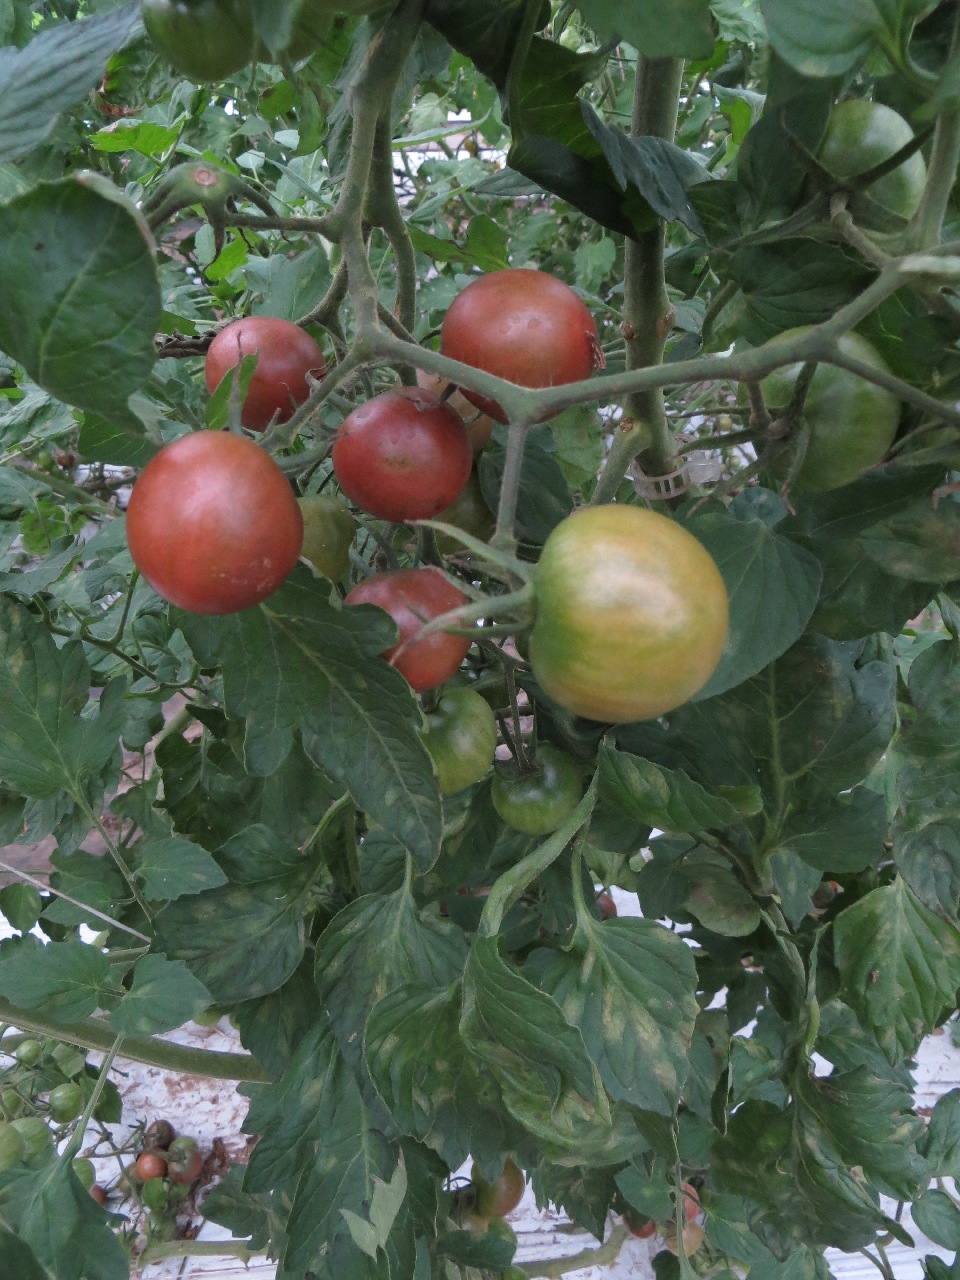 A close-up of a sprig of brownish cherry tomatoes against a backdrop of the vine's leaves. In the foreground a mostly green one is just starting to change color. Many of the leaves have light yellowish smudges on them, especially lower down.